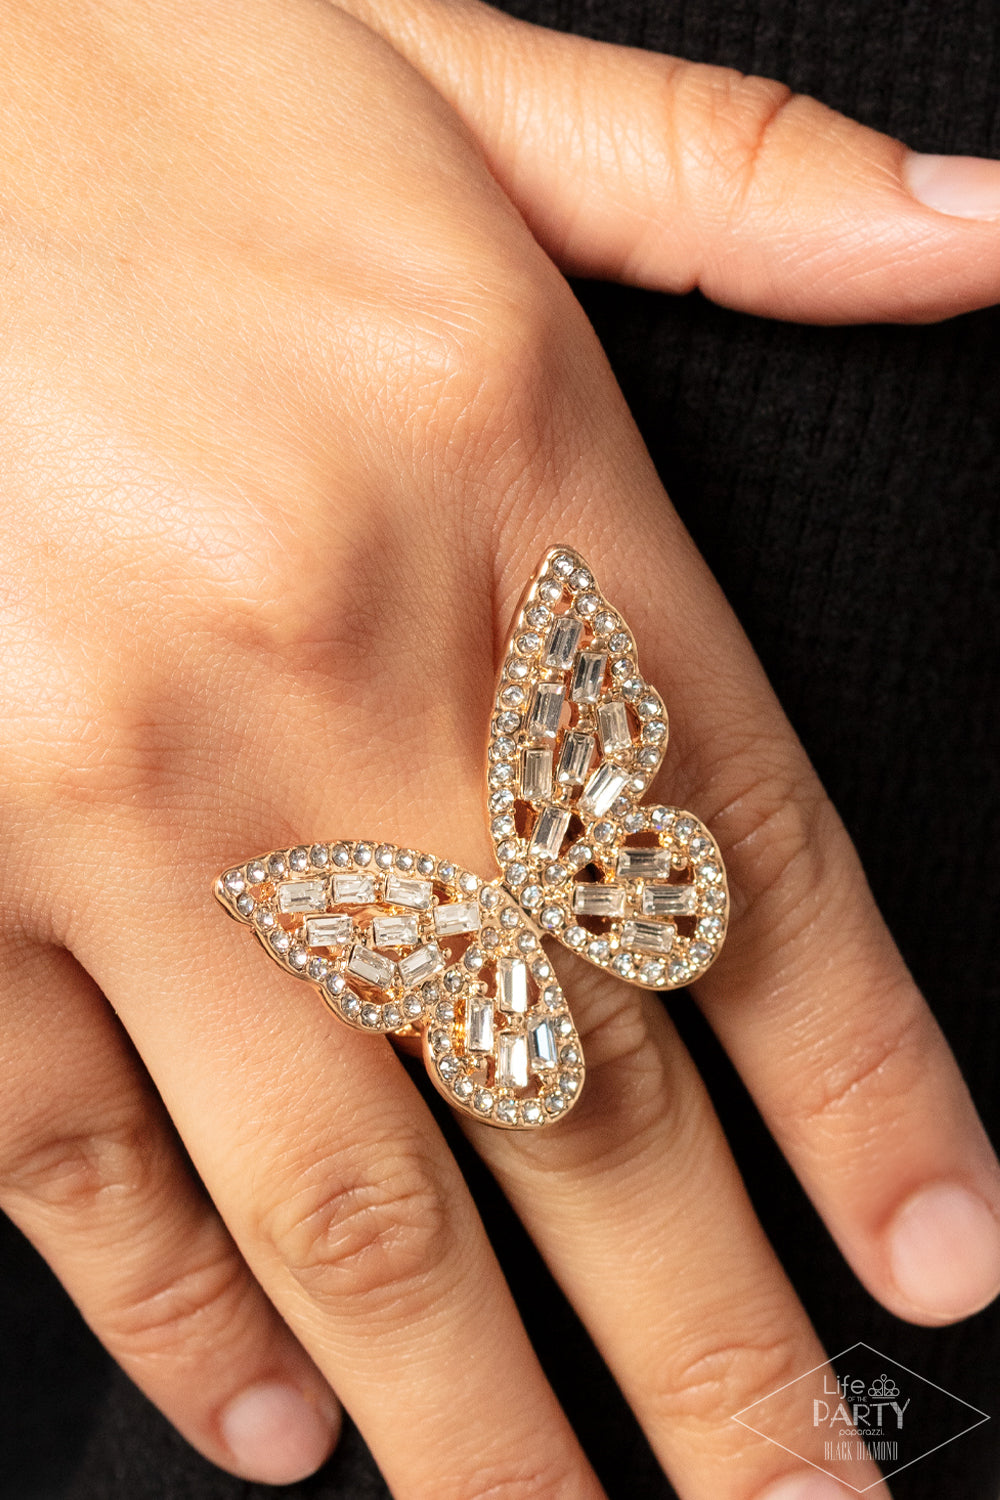 Flauntable Flutter Gold Butterfly Ring - Paparazzi Accessories Item #P4RE-GDXX-218XX Dainty white emerald cut rhinestones are sprinkled across the golden wings of a butterfly that is encrusted in glassy white rhinestones for a dramatically dazzling finish. Features a stretchy band for a flexible fit.  Sold as one individual ring. This Black Diamond Encore is back in the spotlight at the request of our 2022 Life of the Party member with Black Diamond Access, Karla N.